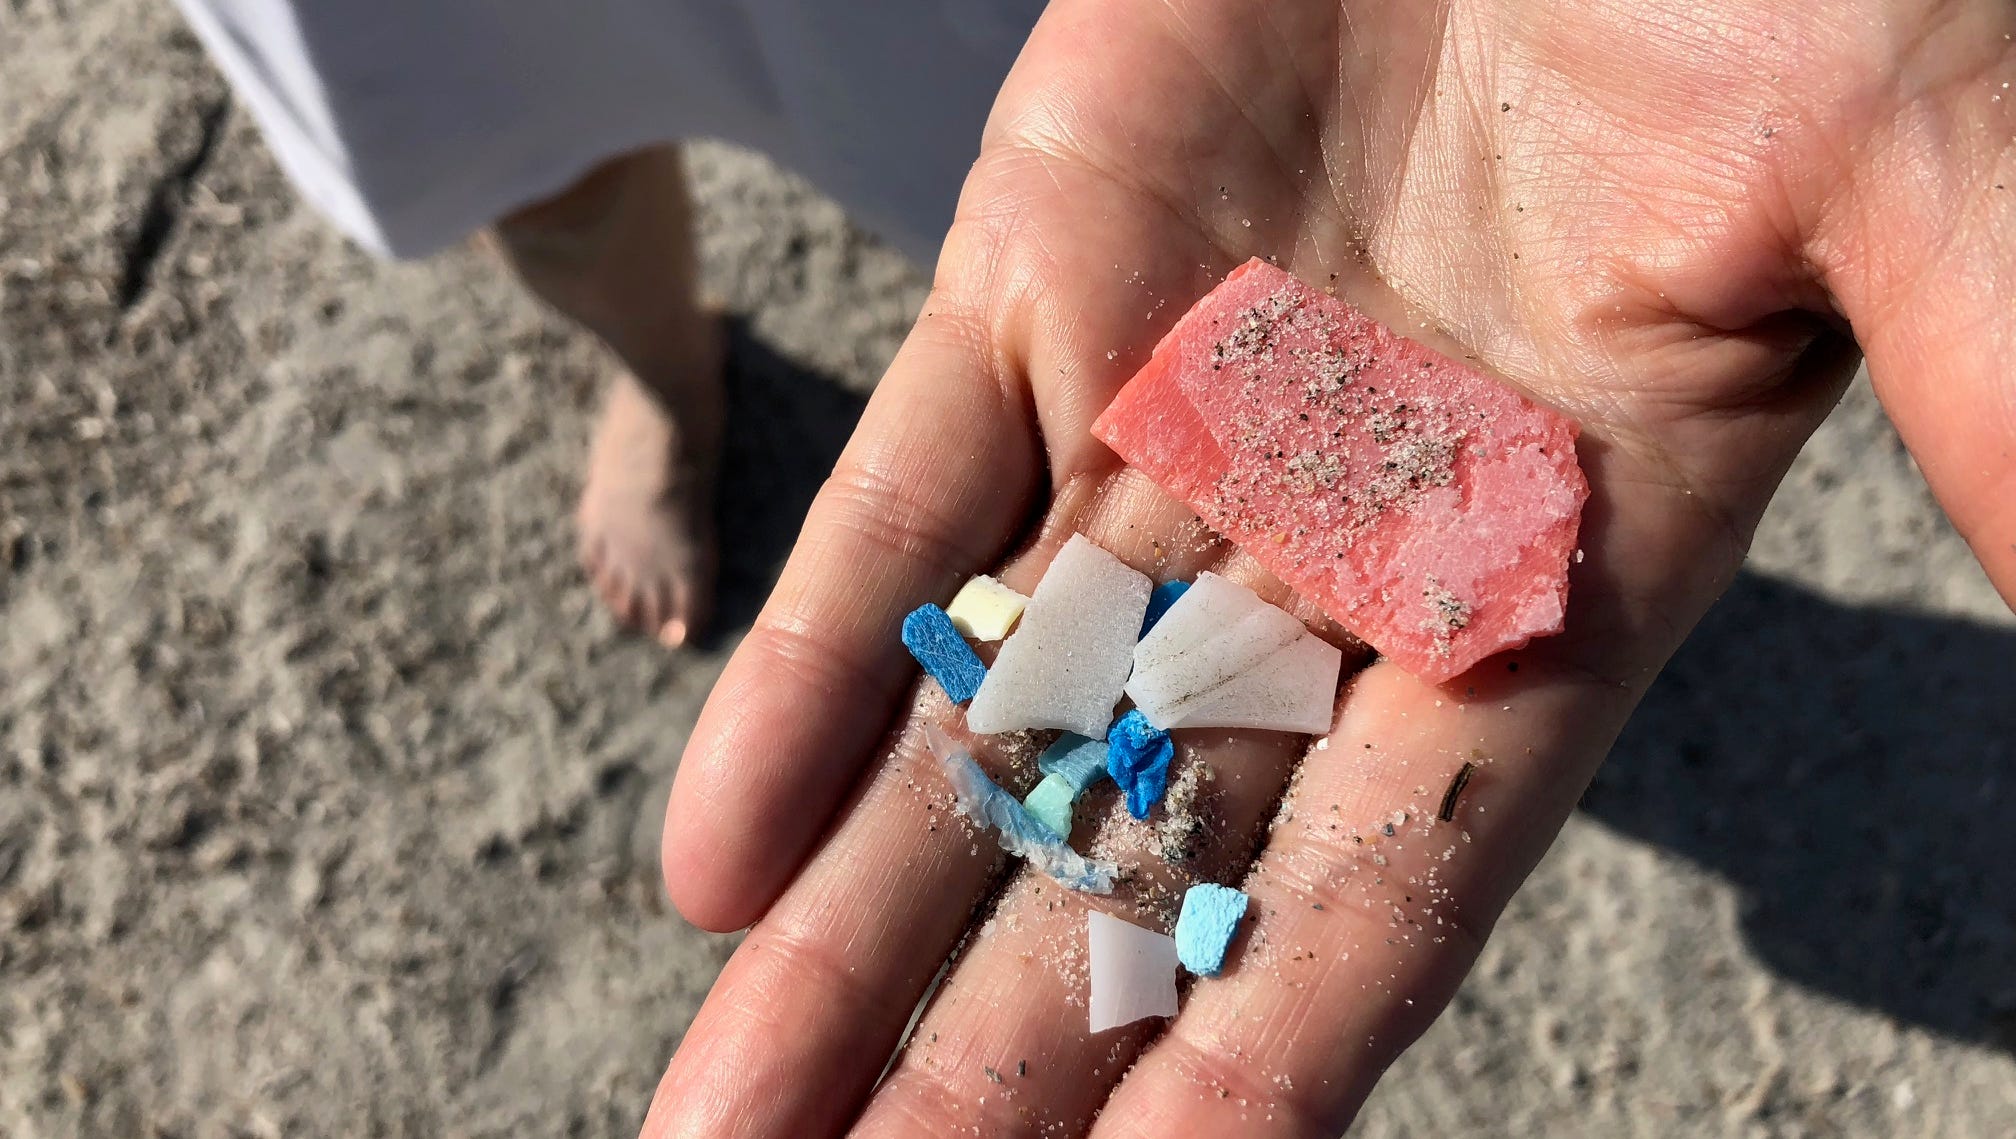 'Plastic rain' poses health and environmental risks, could COVID be among them? - Florida Today